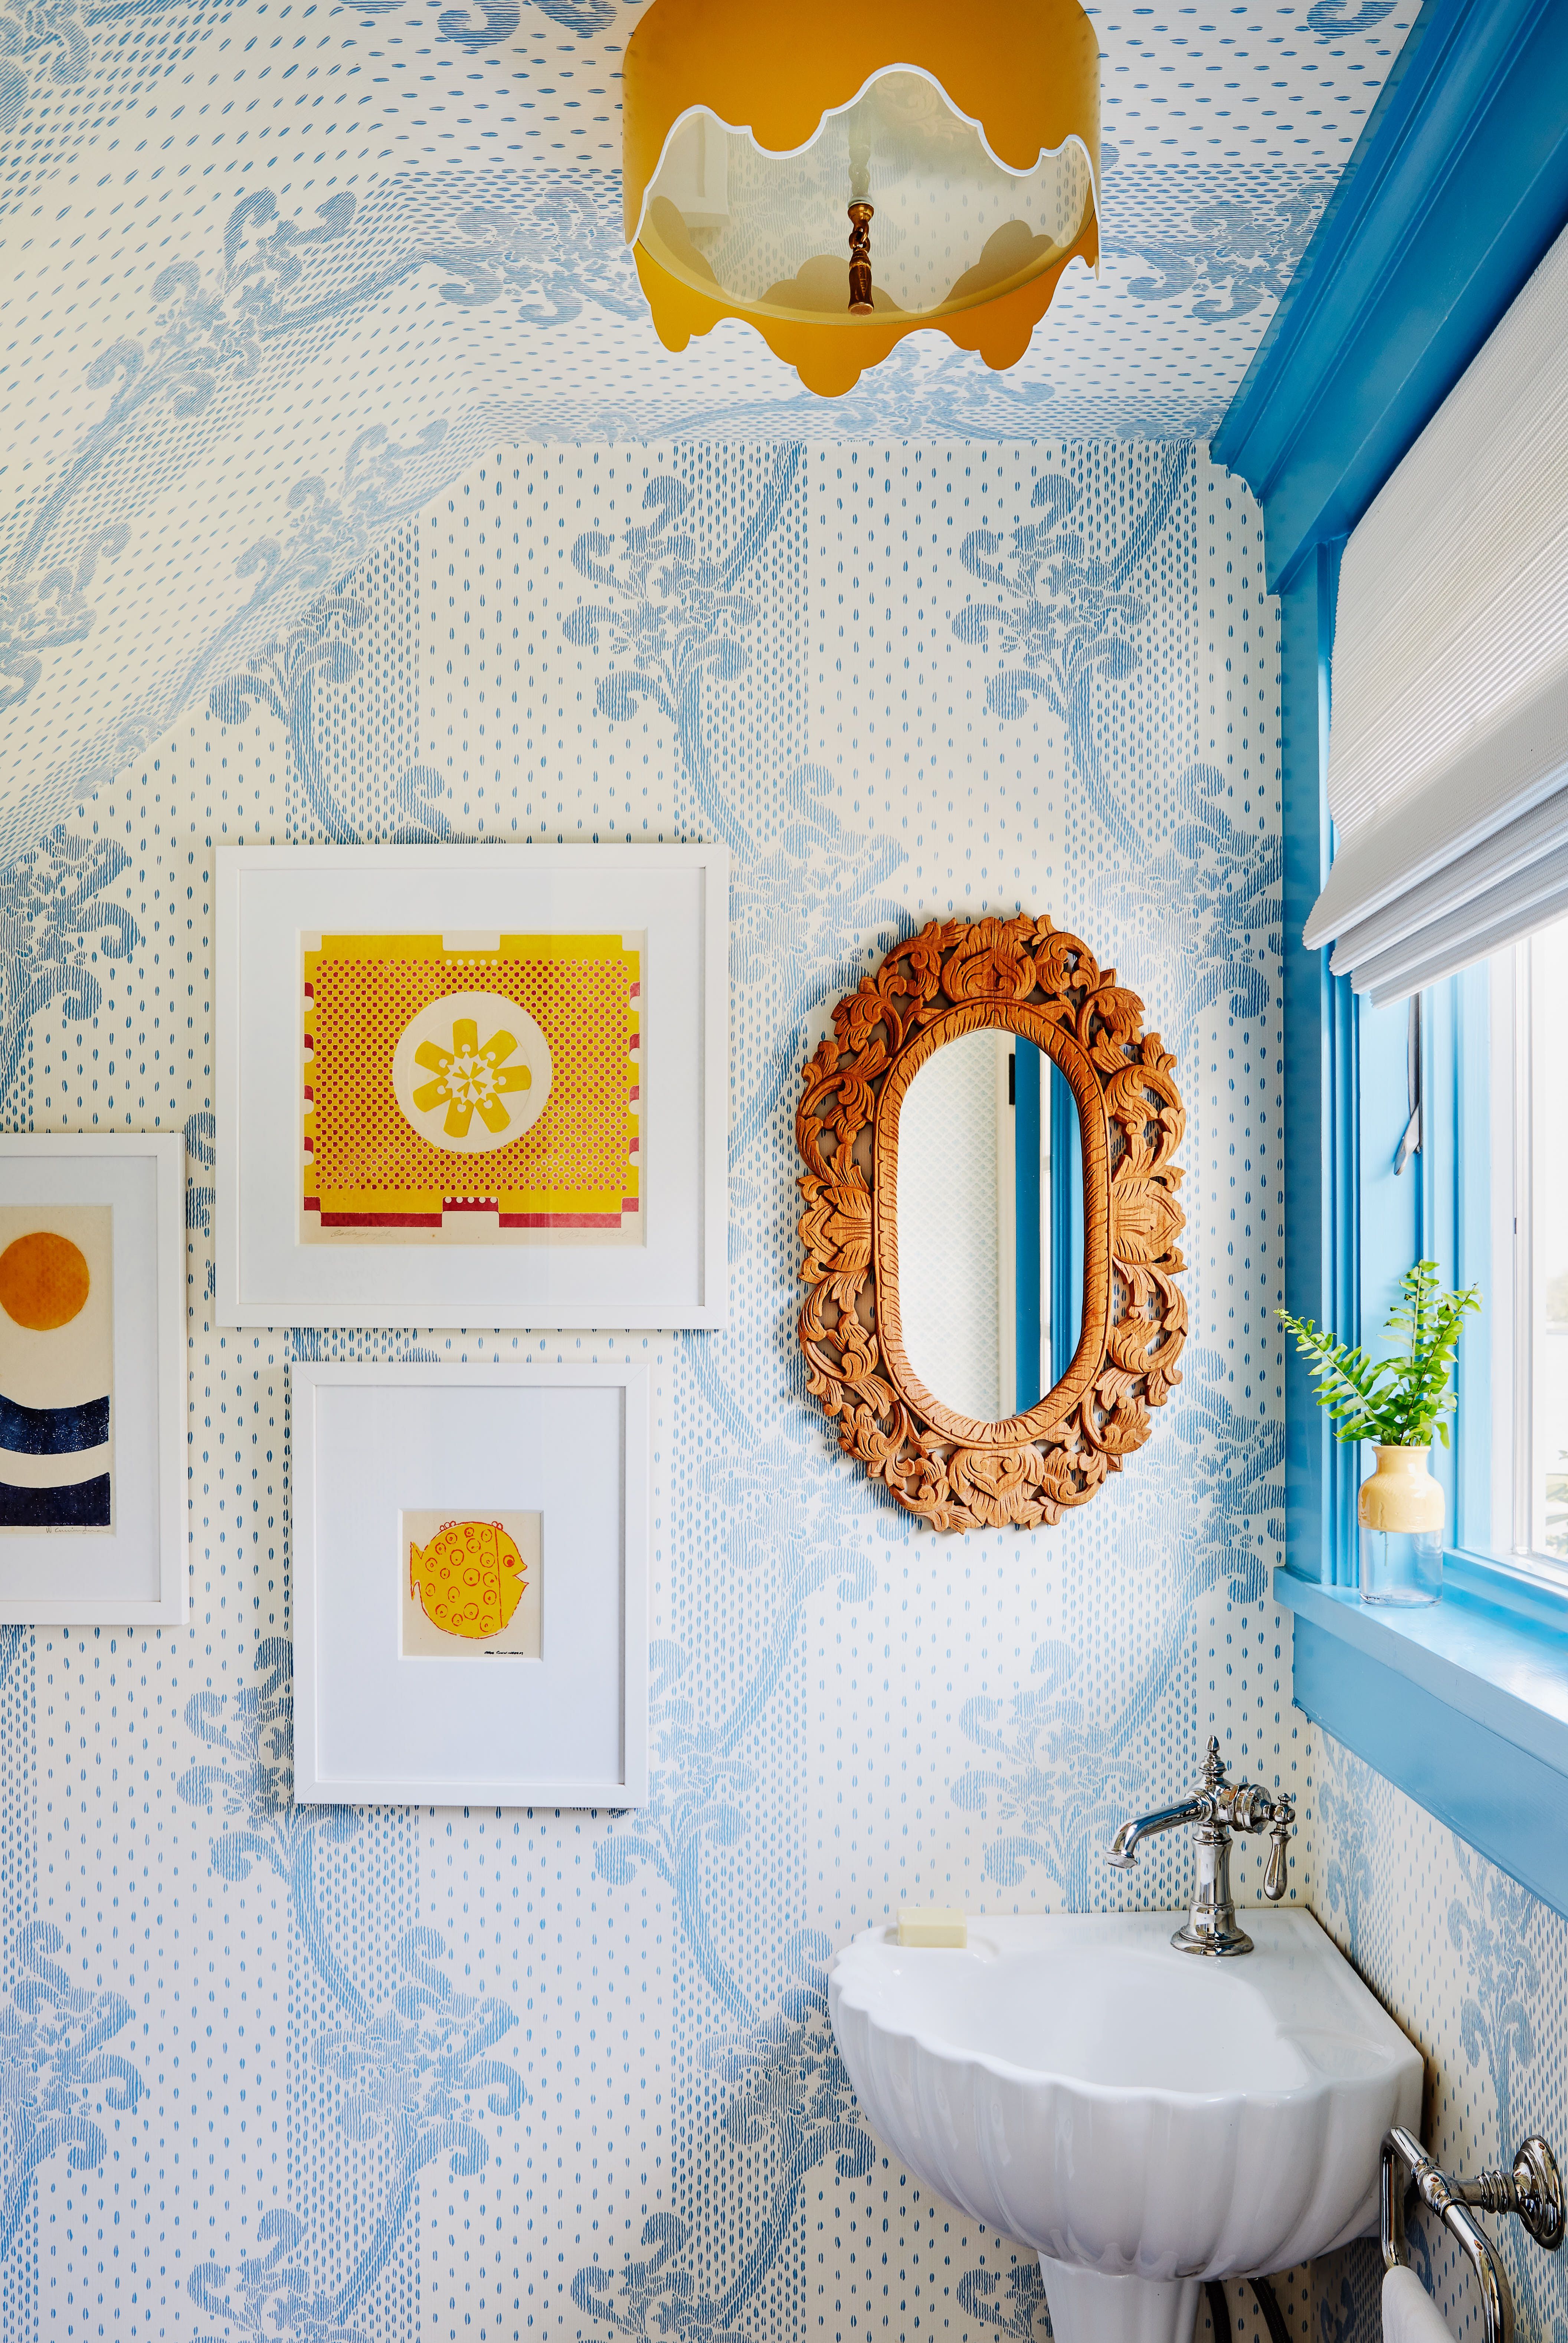 How to Masterfully Decorate Bathroom Shelves Like a Pro